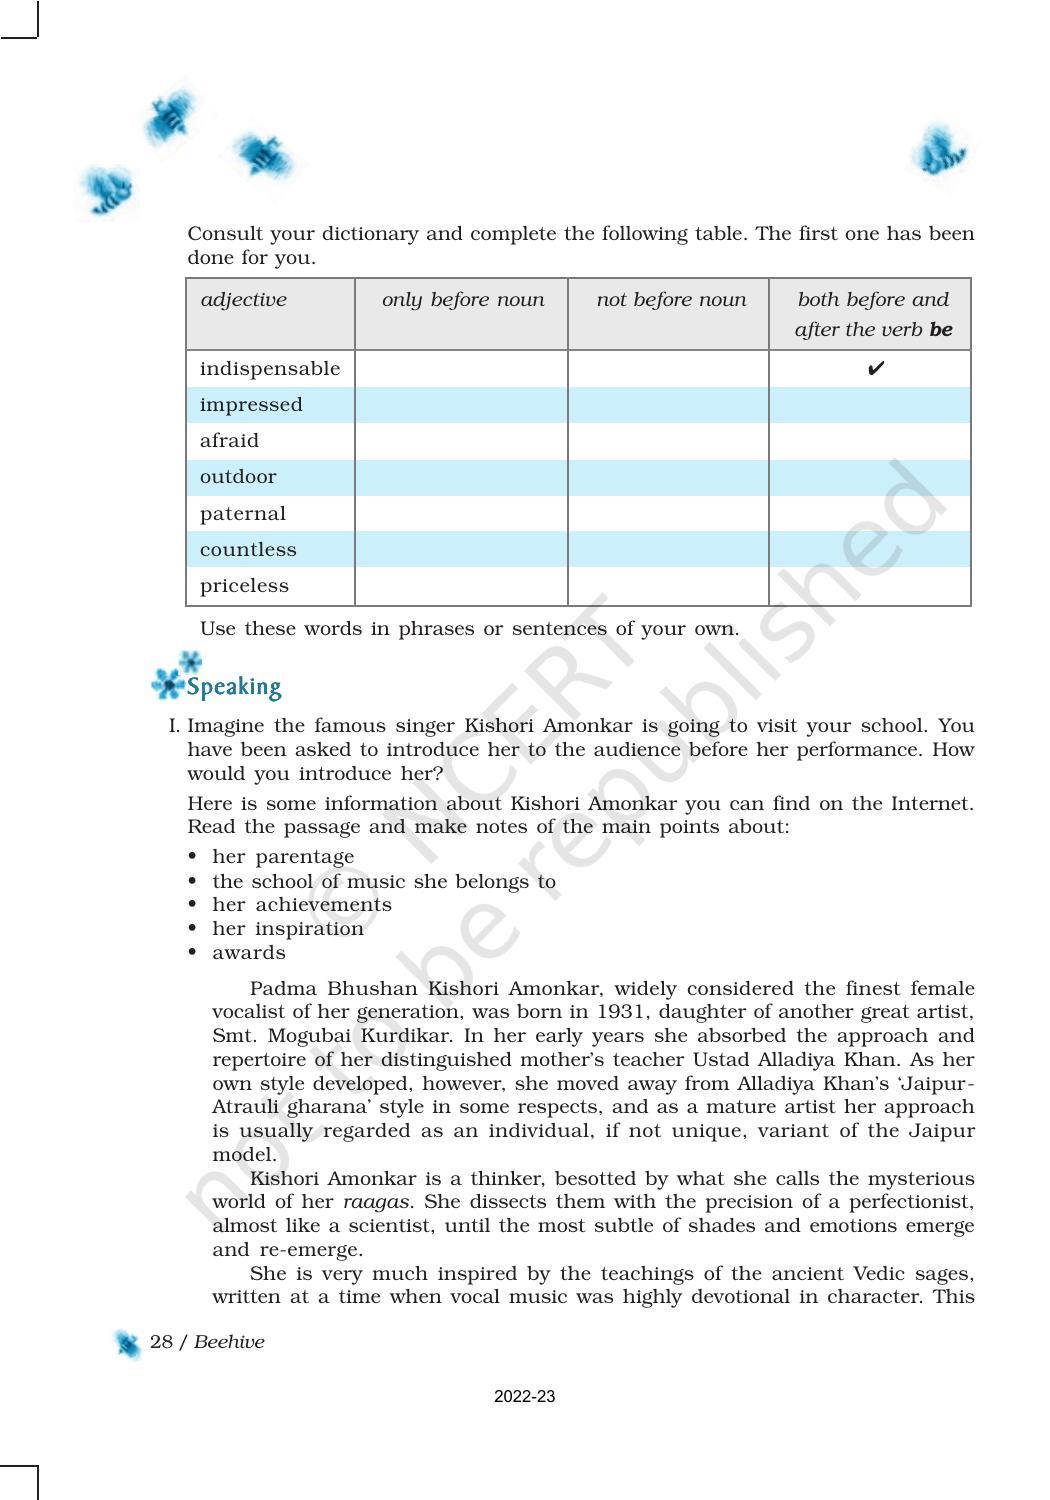 NCERT Book for Class 9 English Chapter 2 The Sound of Music - Page 12